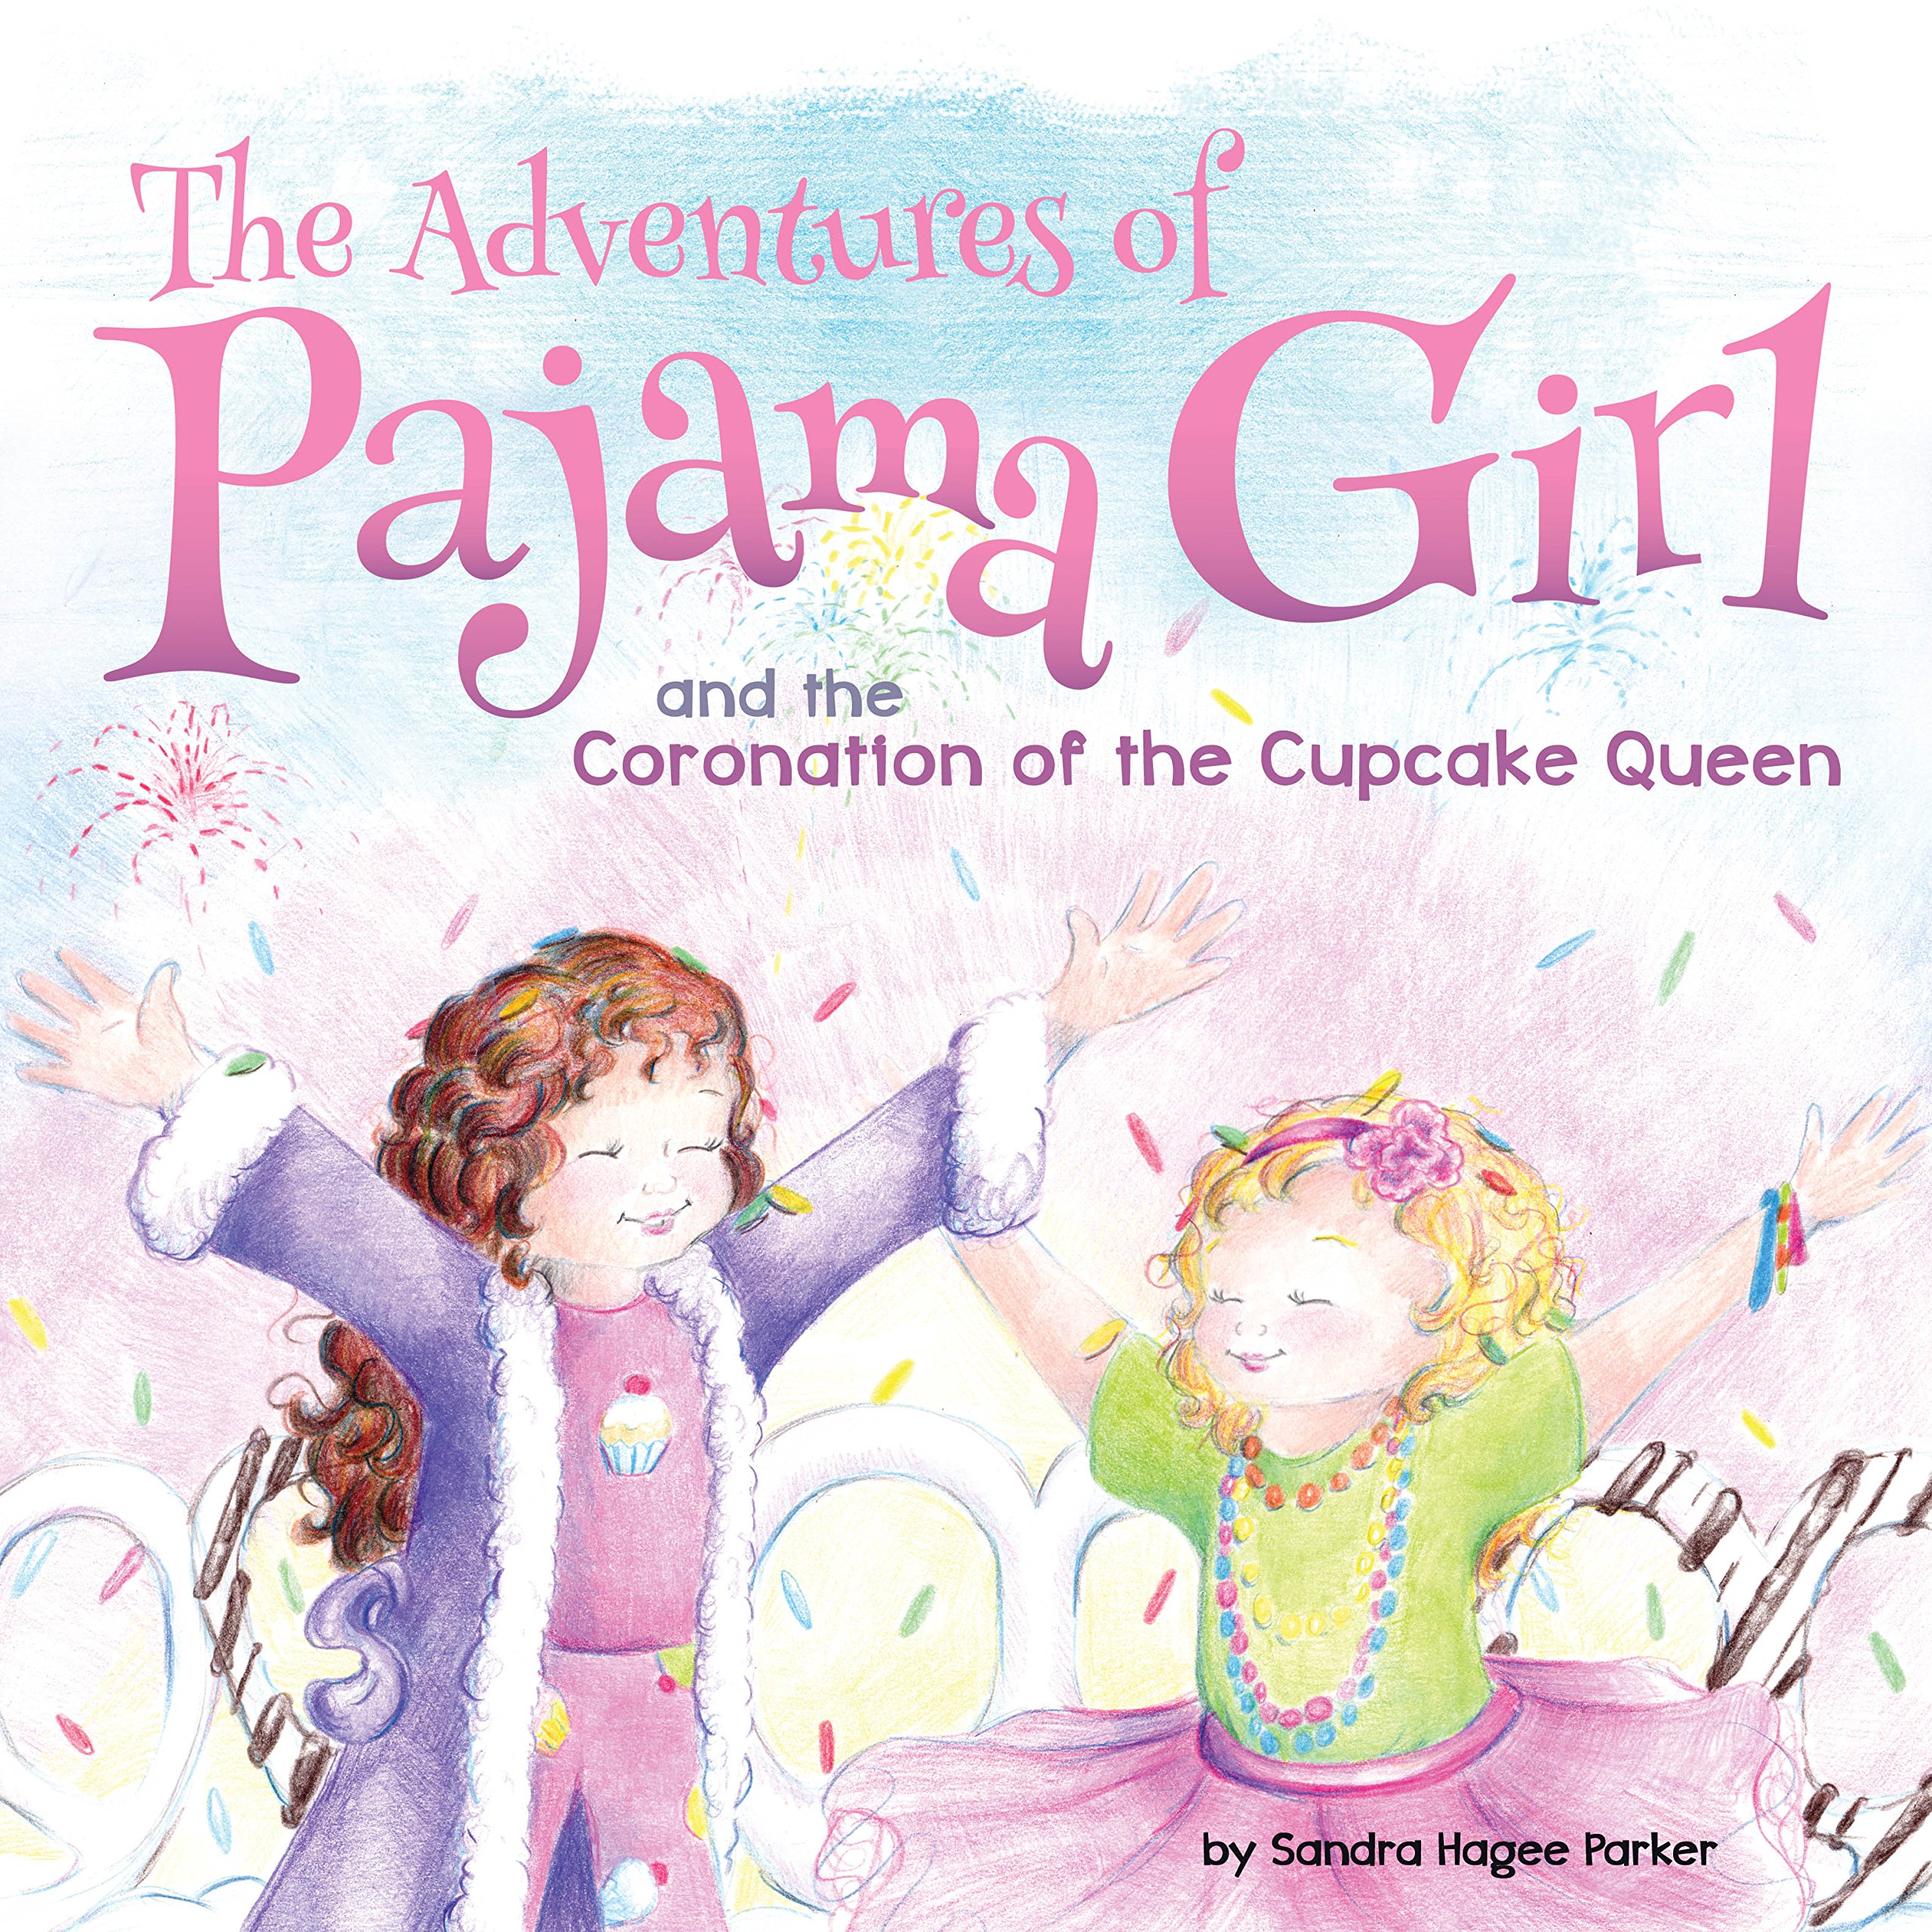 Book Review: The Adventures of Pajama Girl and the Coronation of the Cupcake Queen by Sandra Hagee Parker